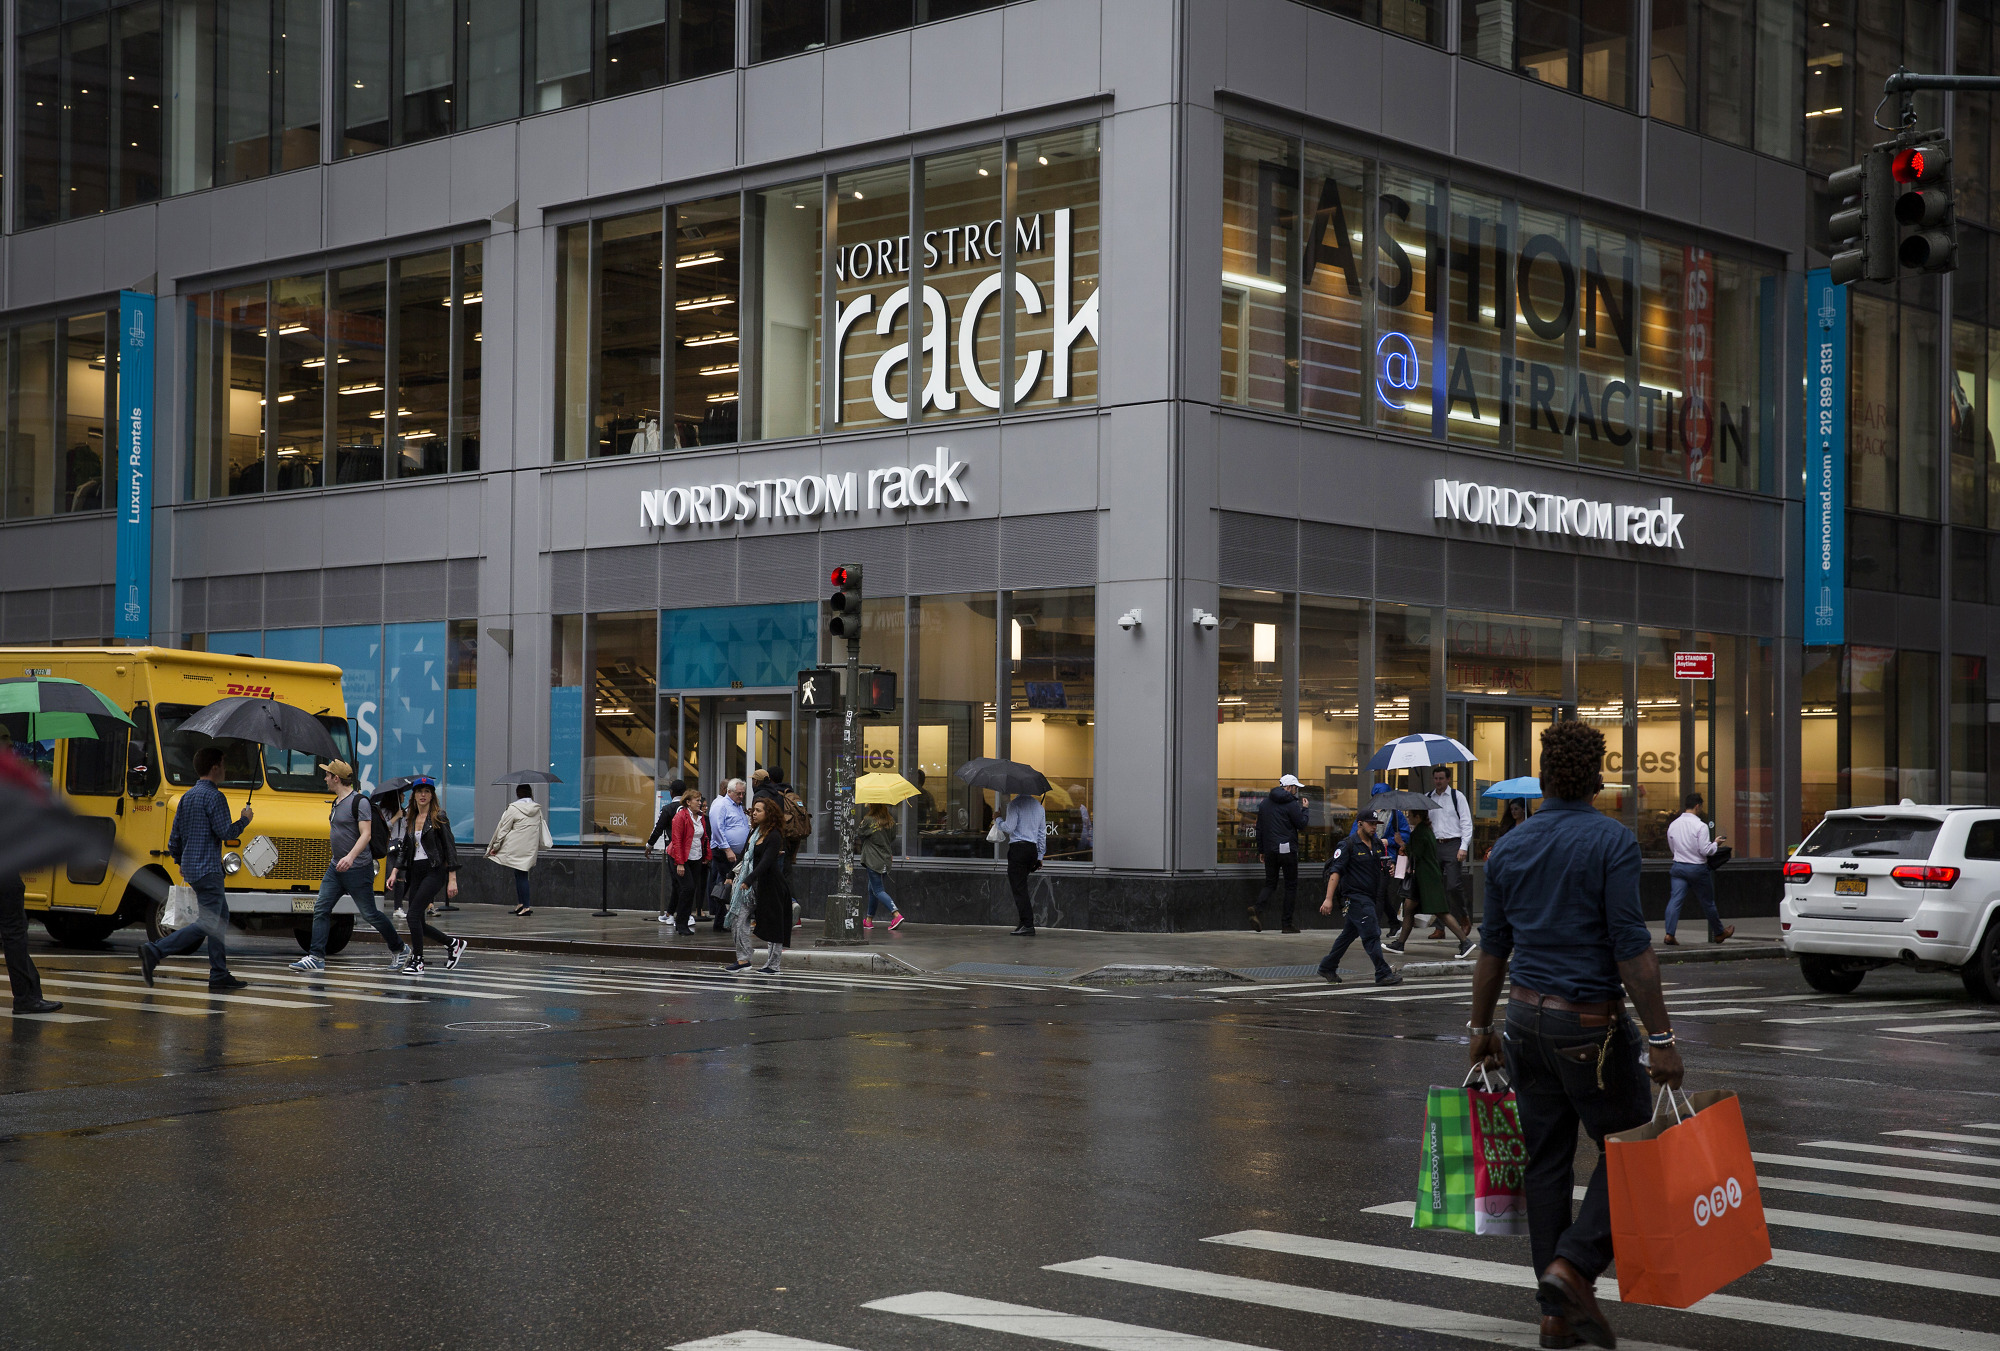 Nordstrom's new NYC store will drive $700 million in sales